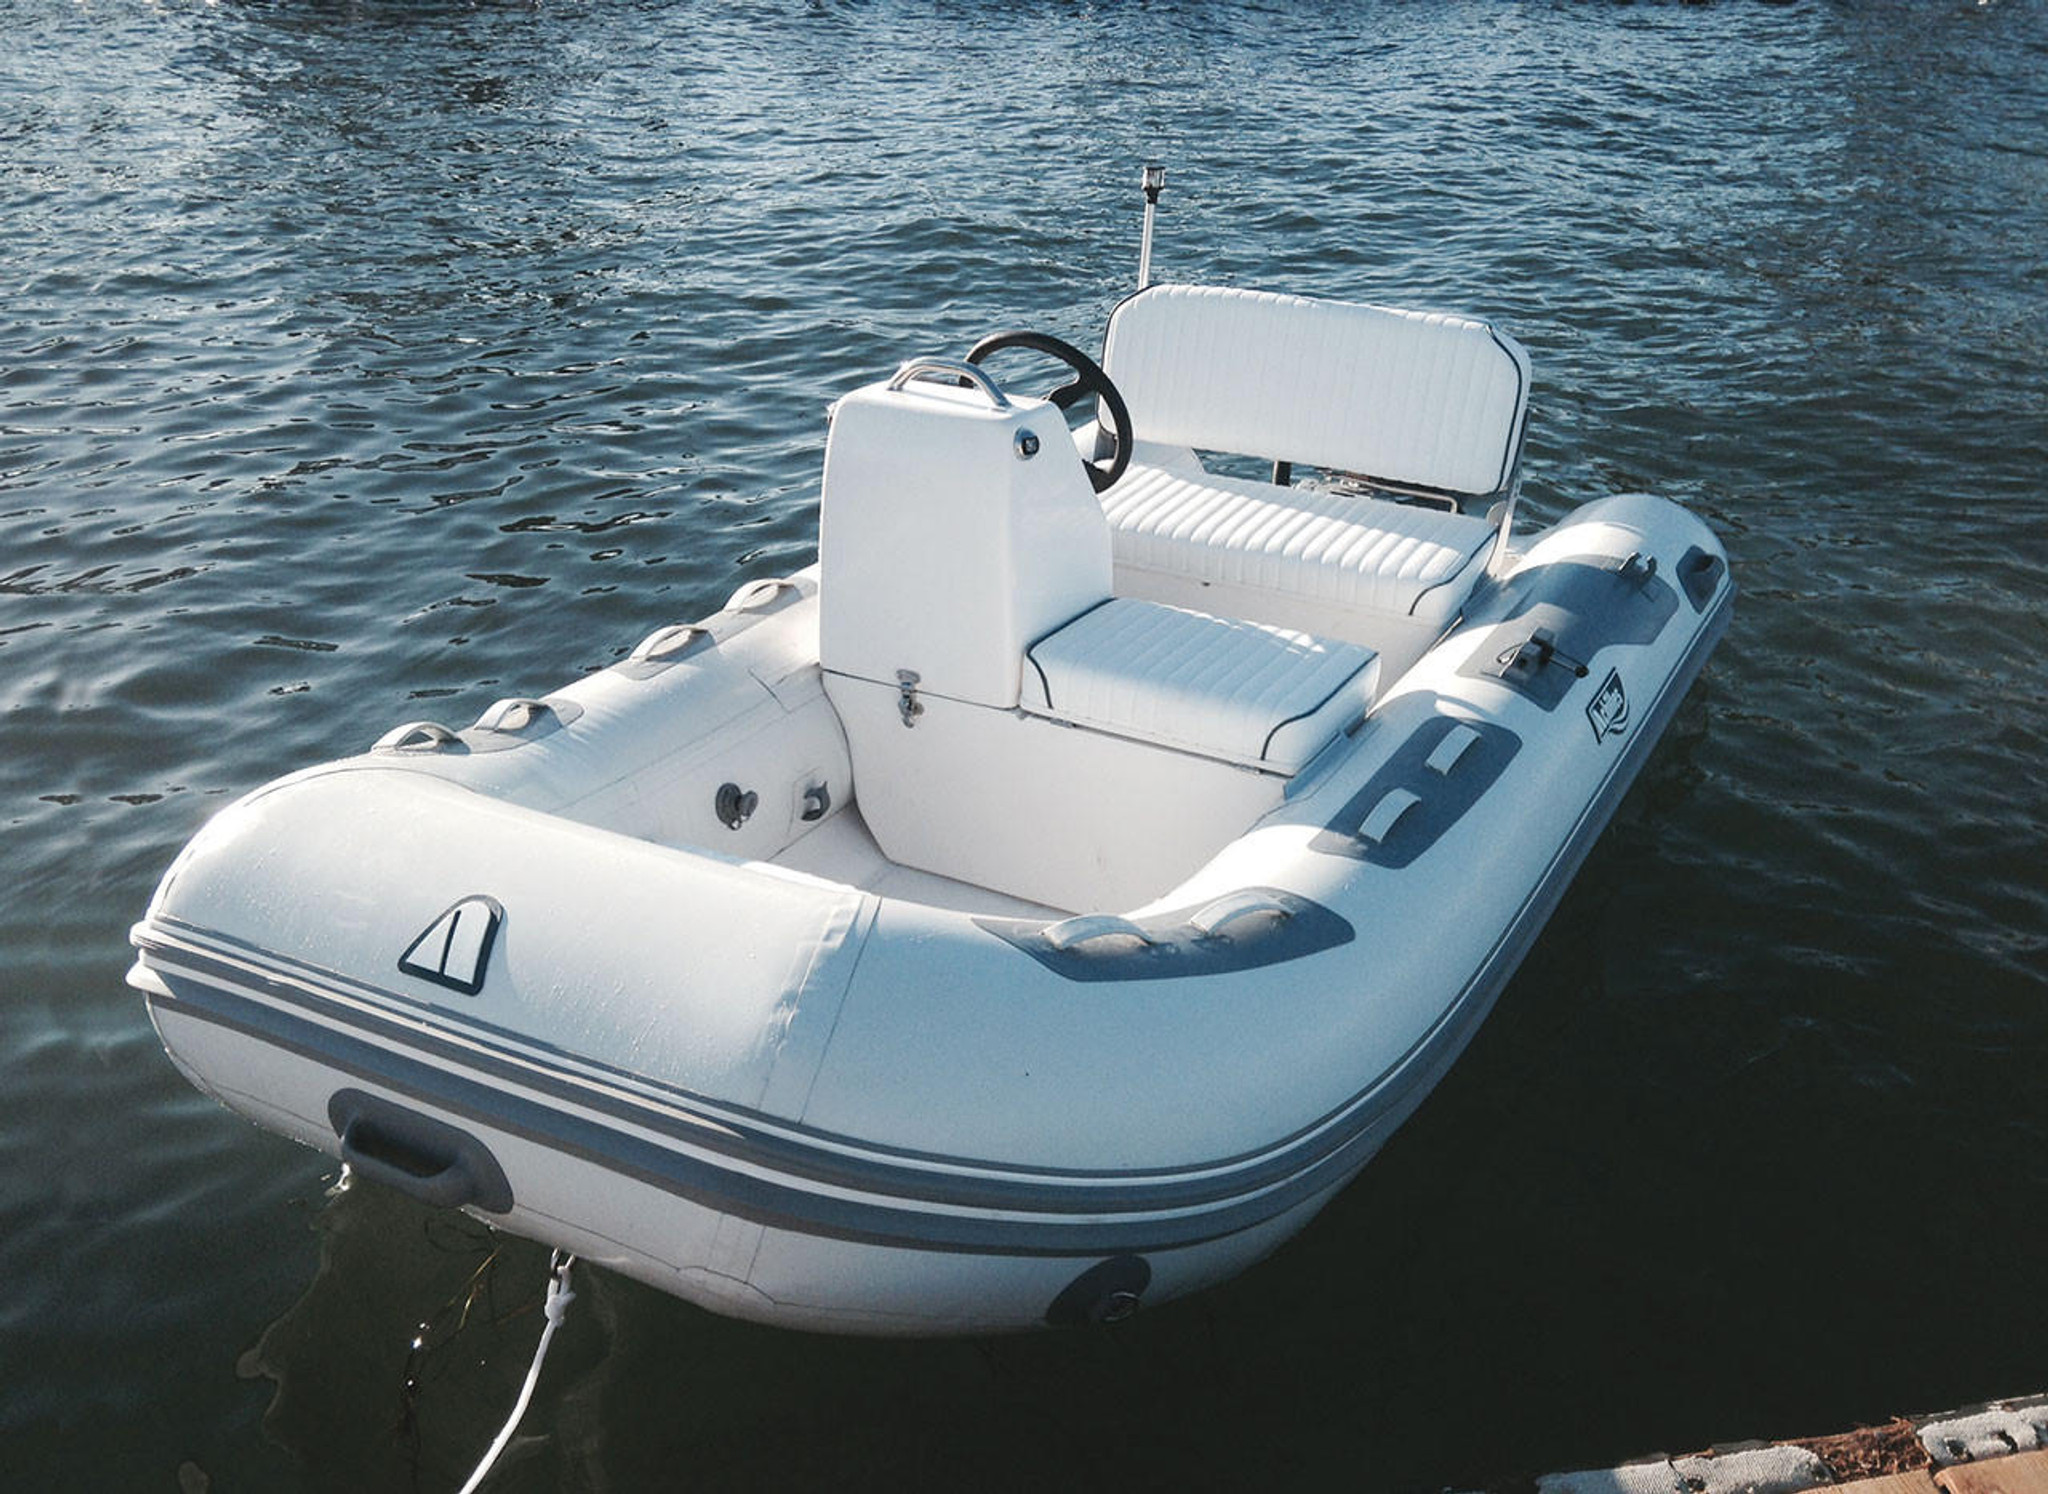 Achilles HB-DX Series Inflatable Boat